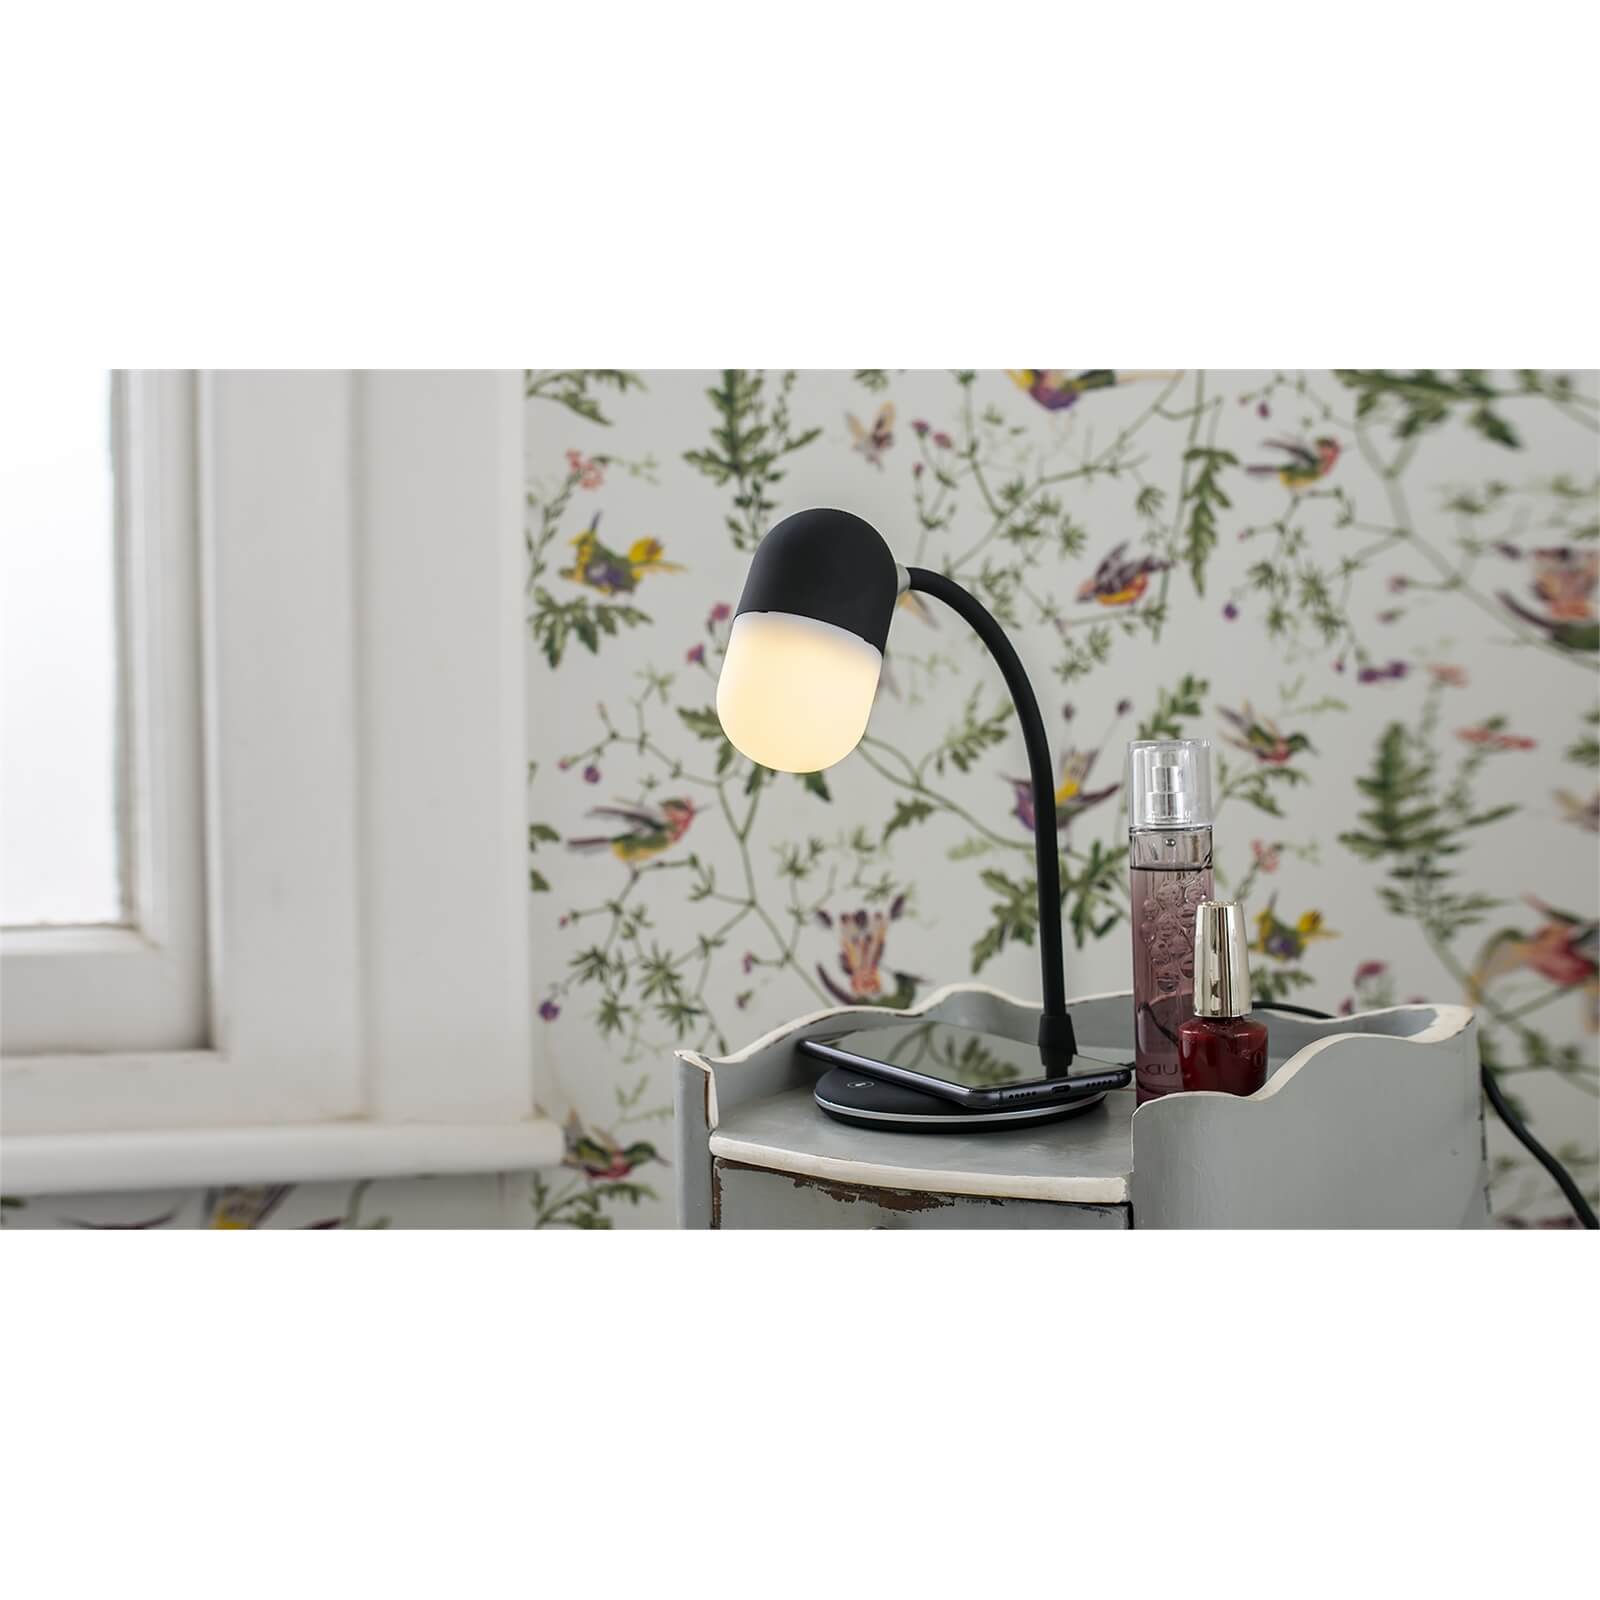 Groov-E Apollo Desk Lamp with Speaker and Wireless Charging Pad